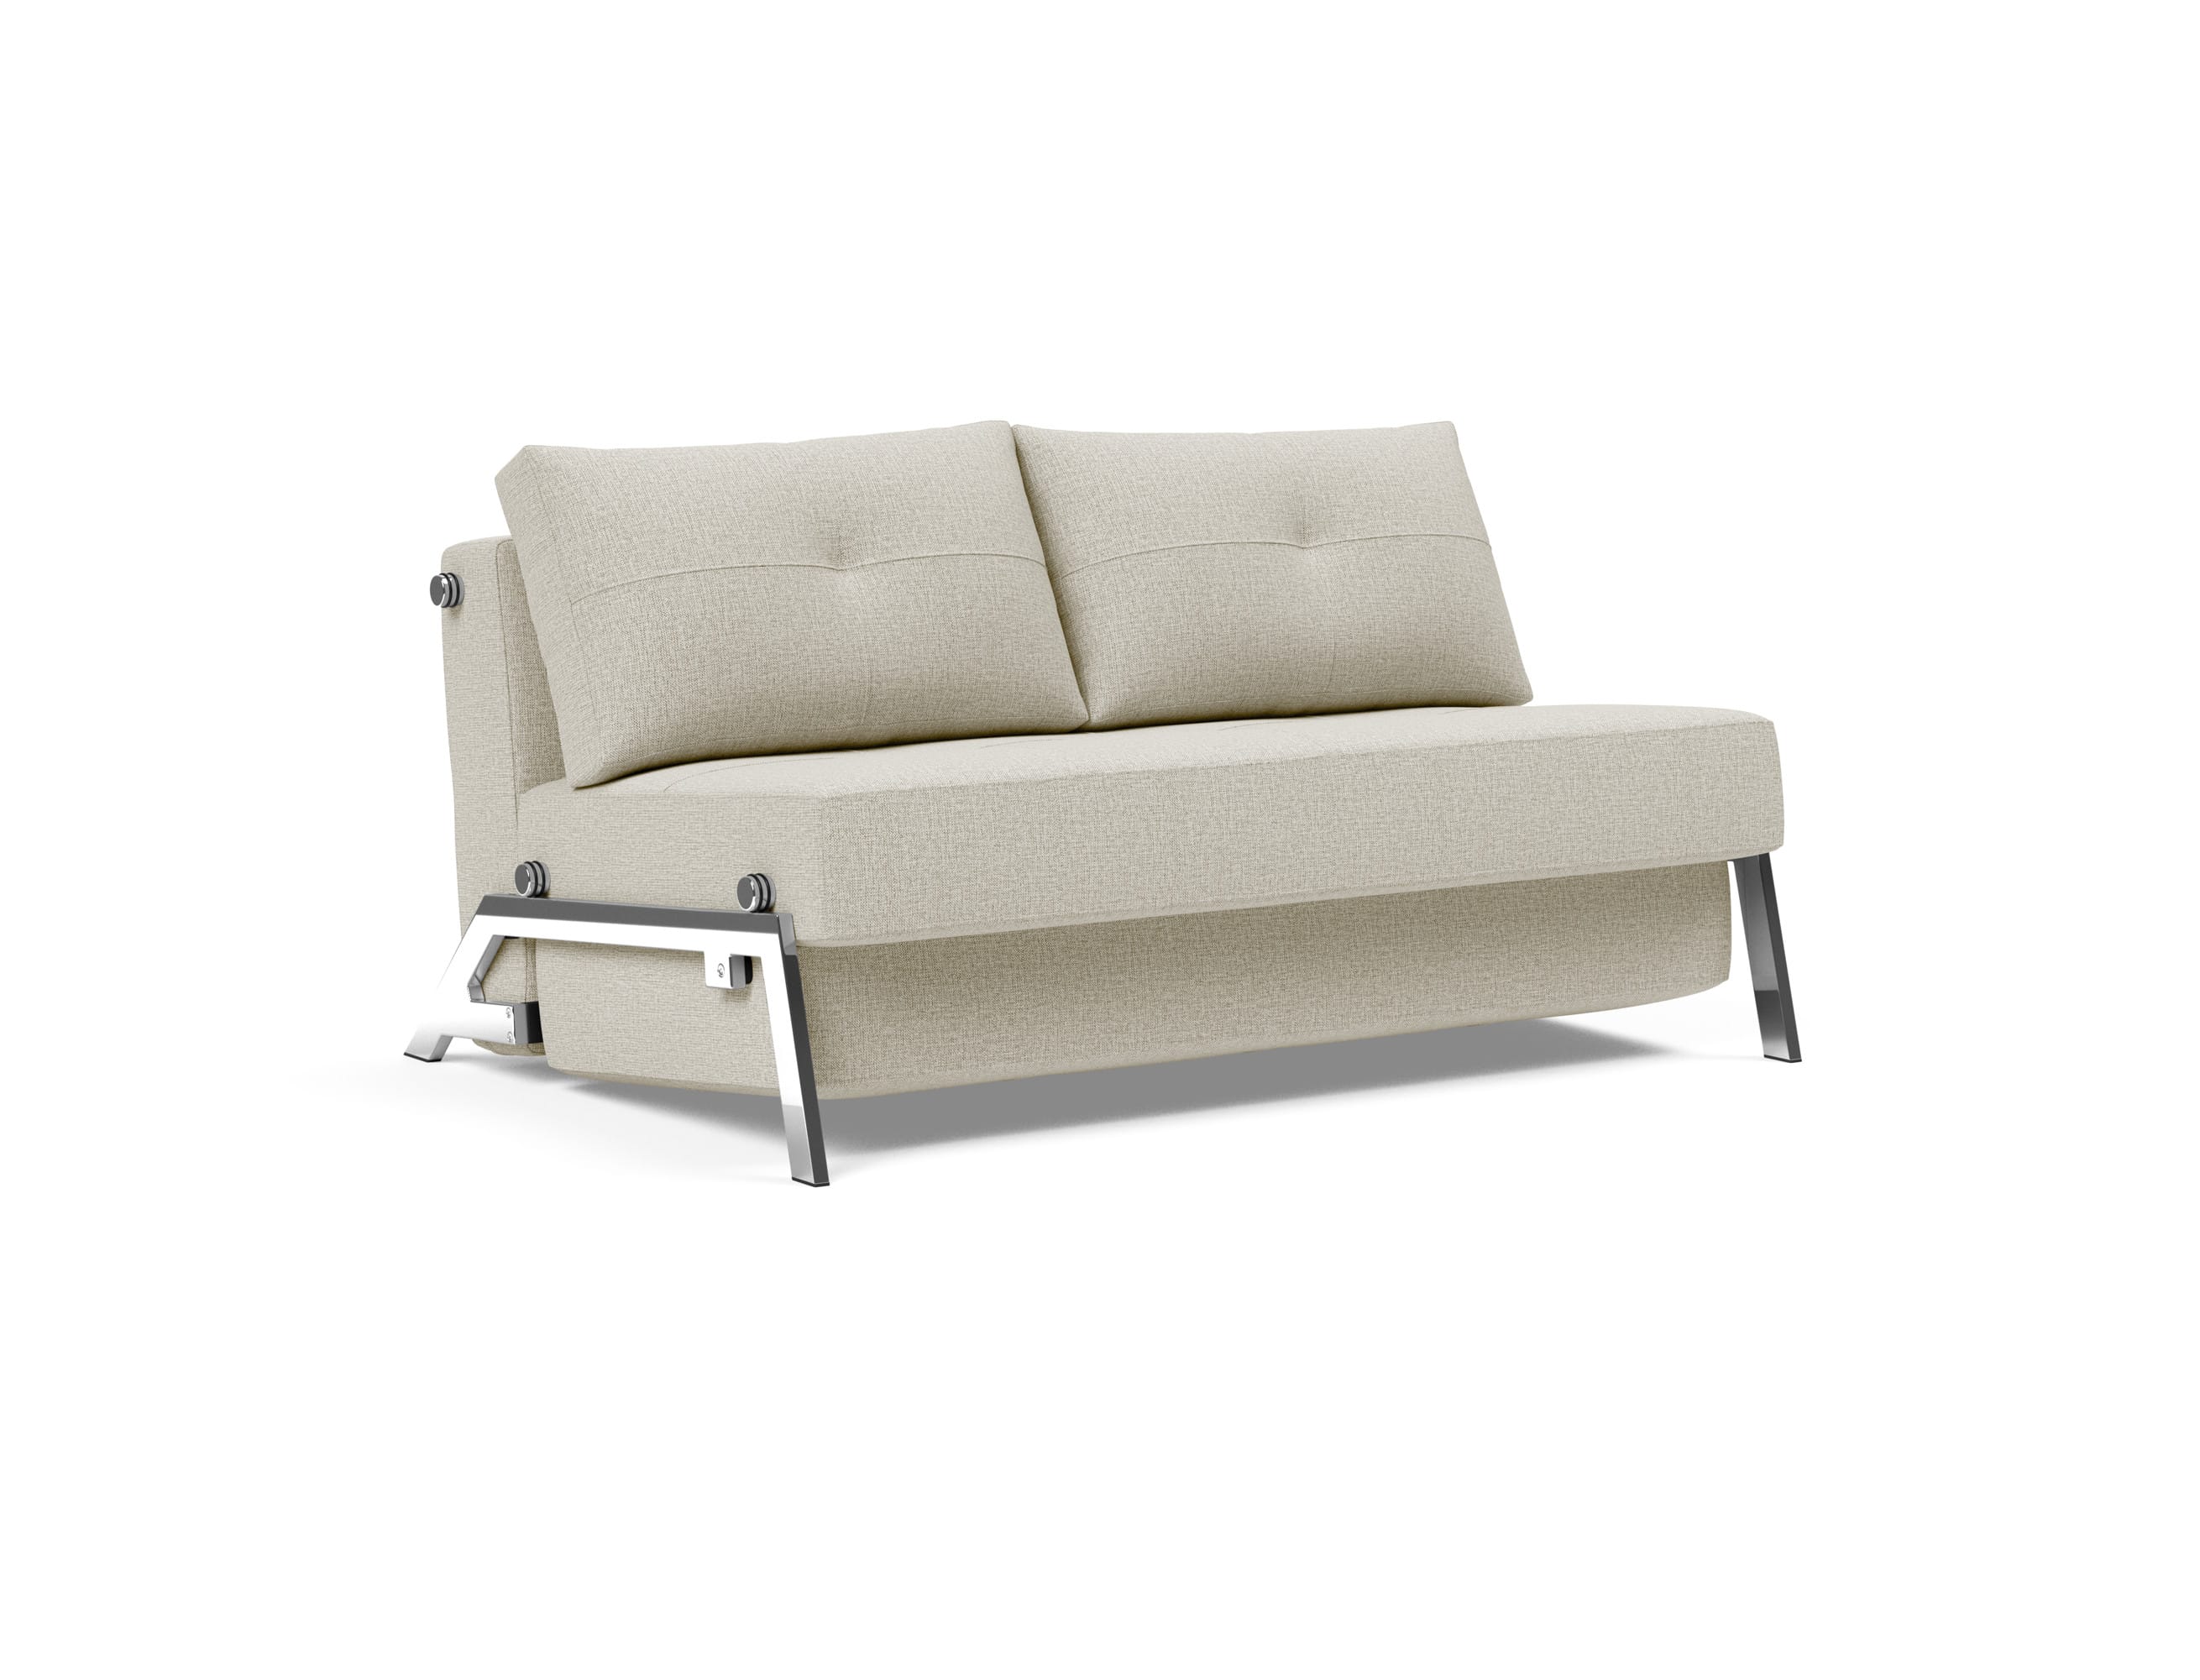 Cubed Deluxe Sofa Bed (Full Size) Mixed Dance Natural by Innovation